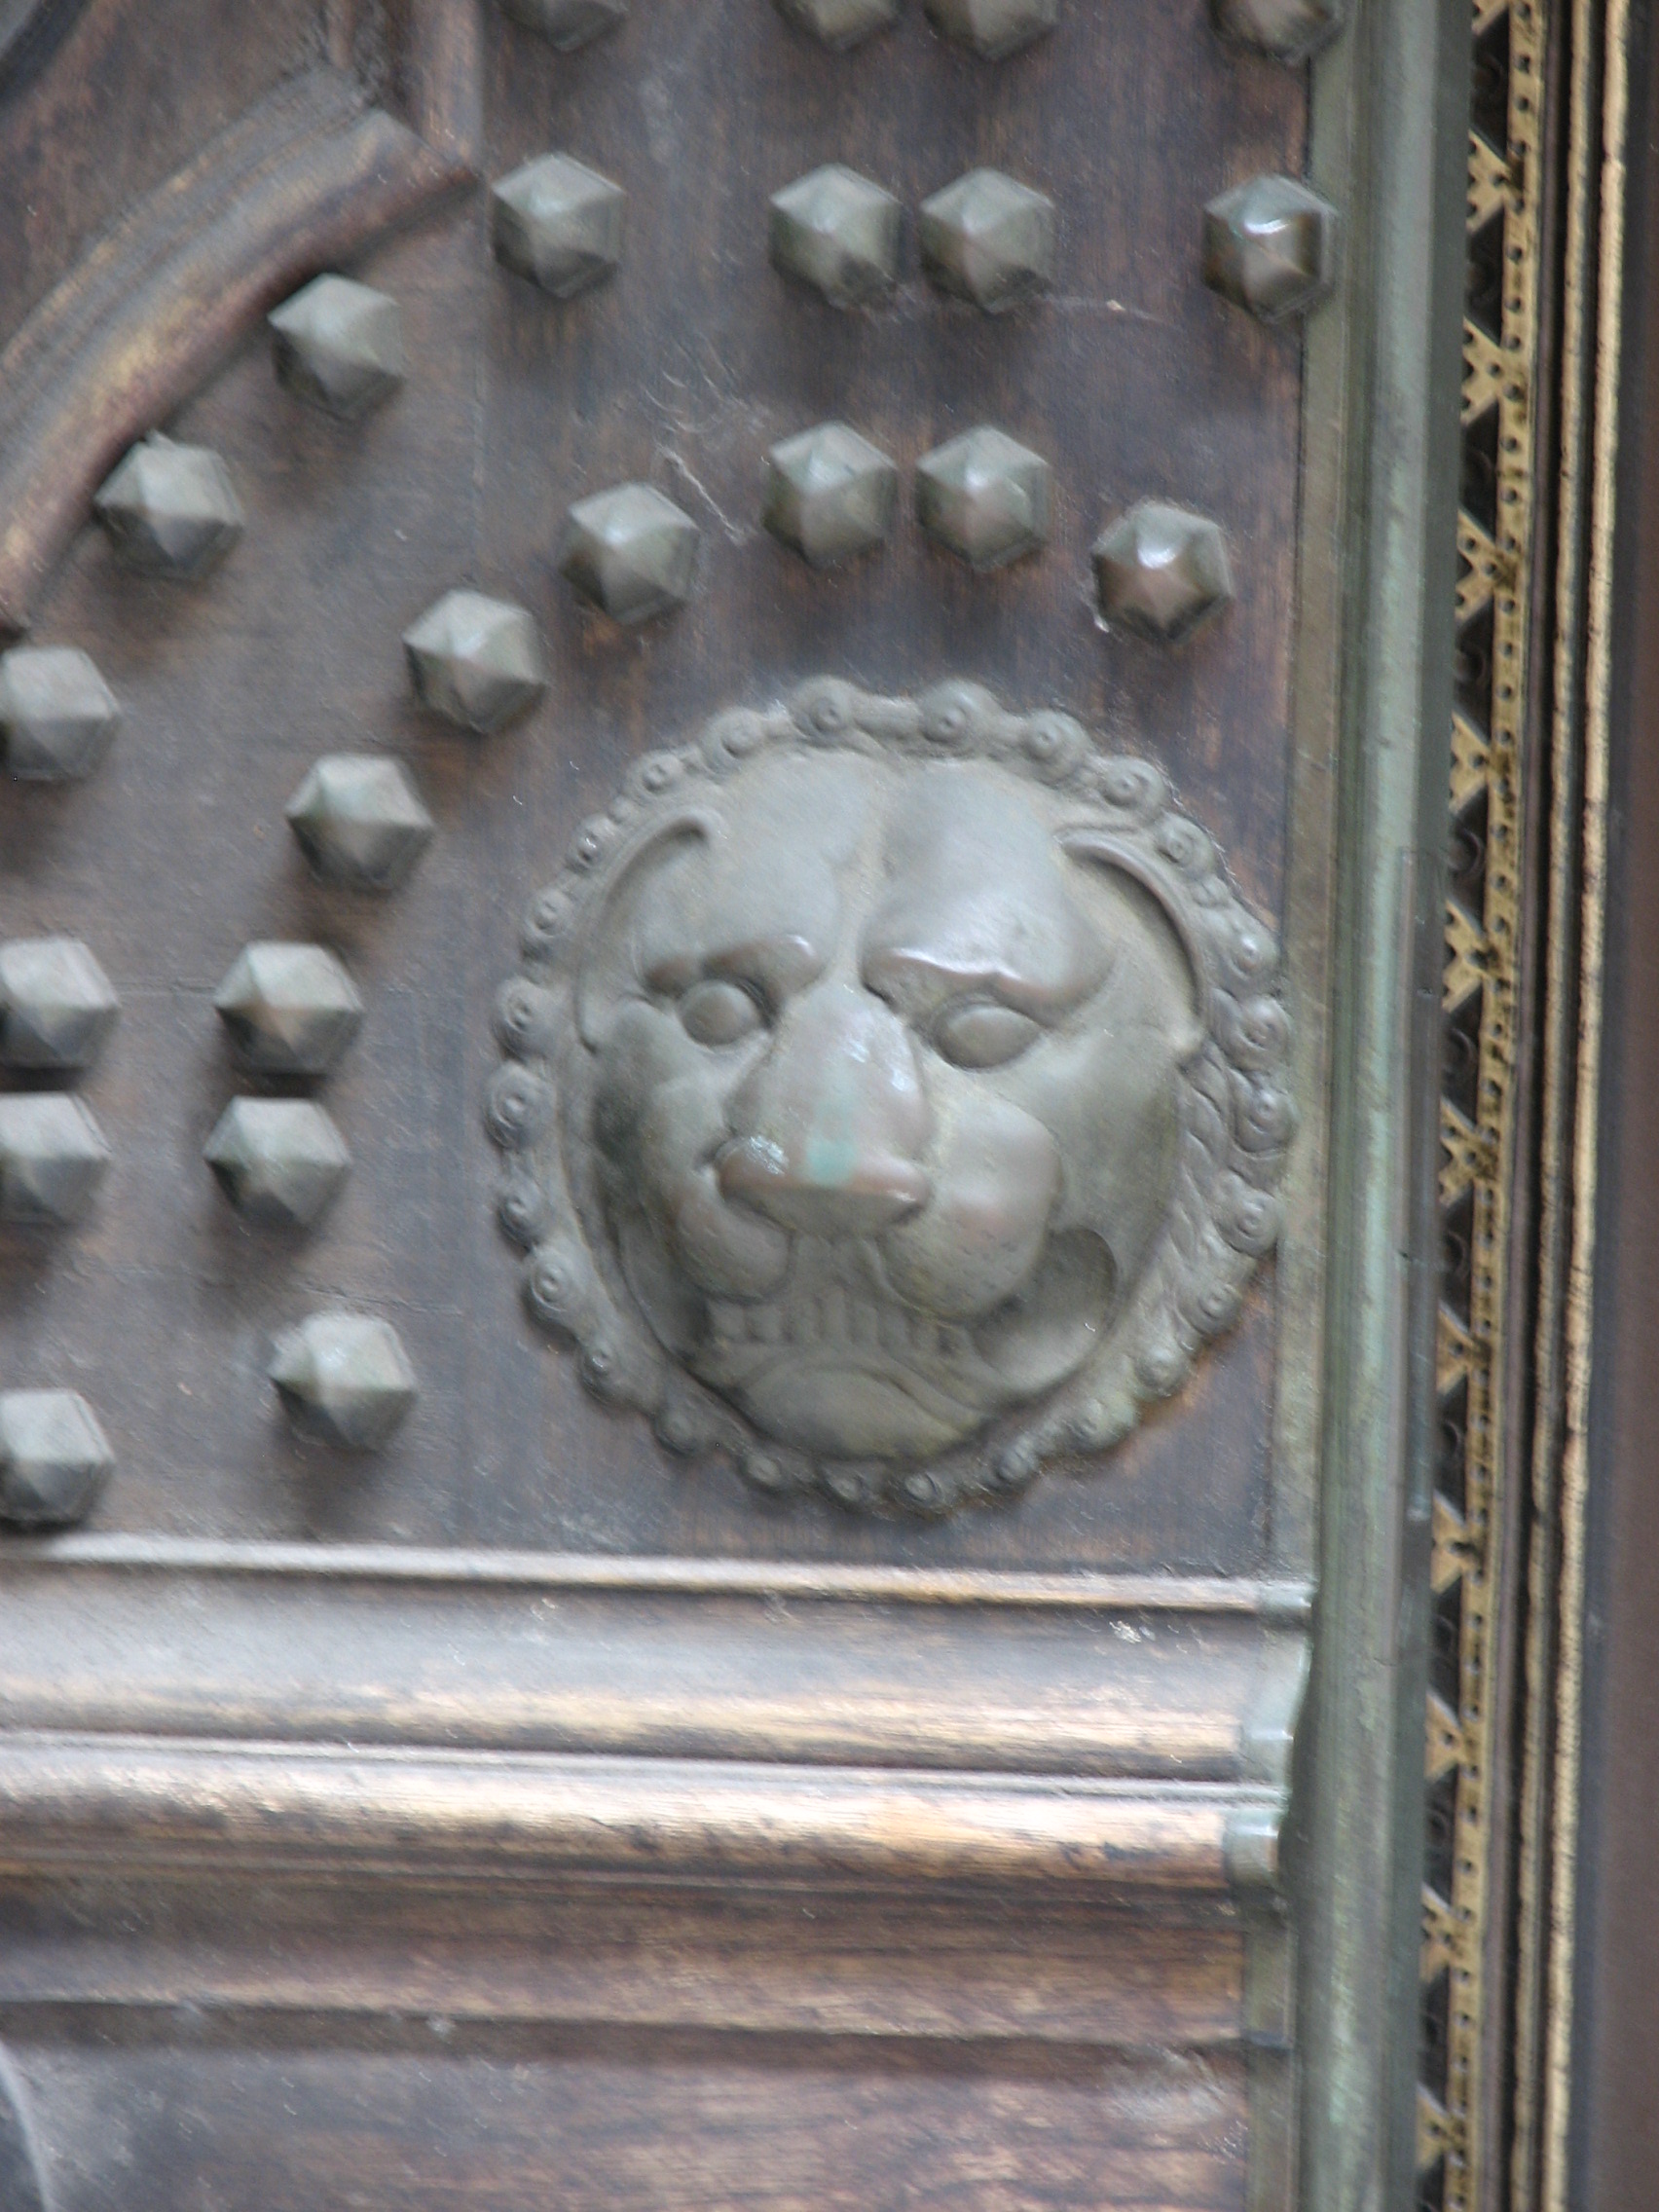 A detail from the massive, iron pocket doors at the entrance of the Drexel & Company Building.